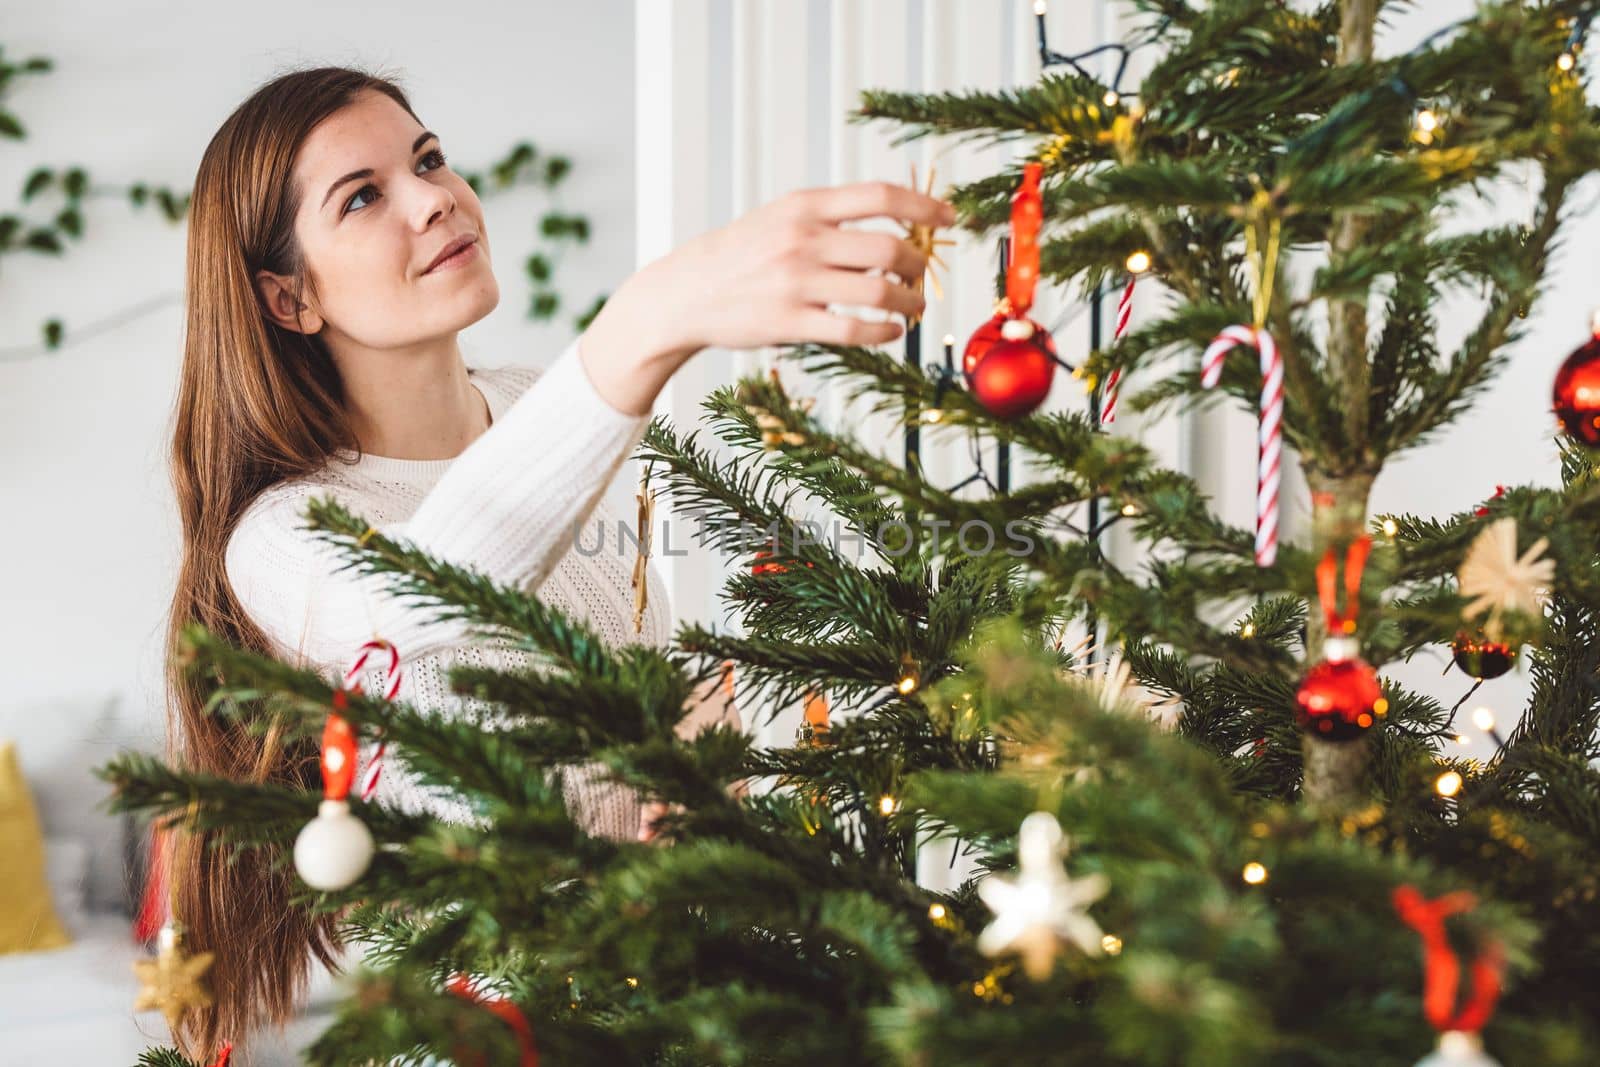 Smiling caucasian woman looking up at the natural Christmas tree she is decorating by herself by VisualProductions